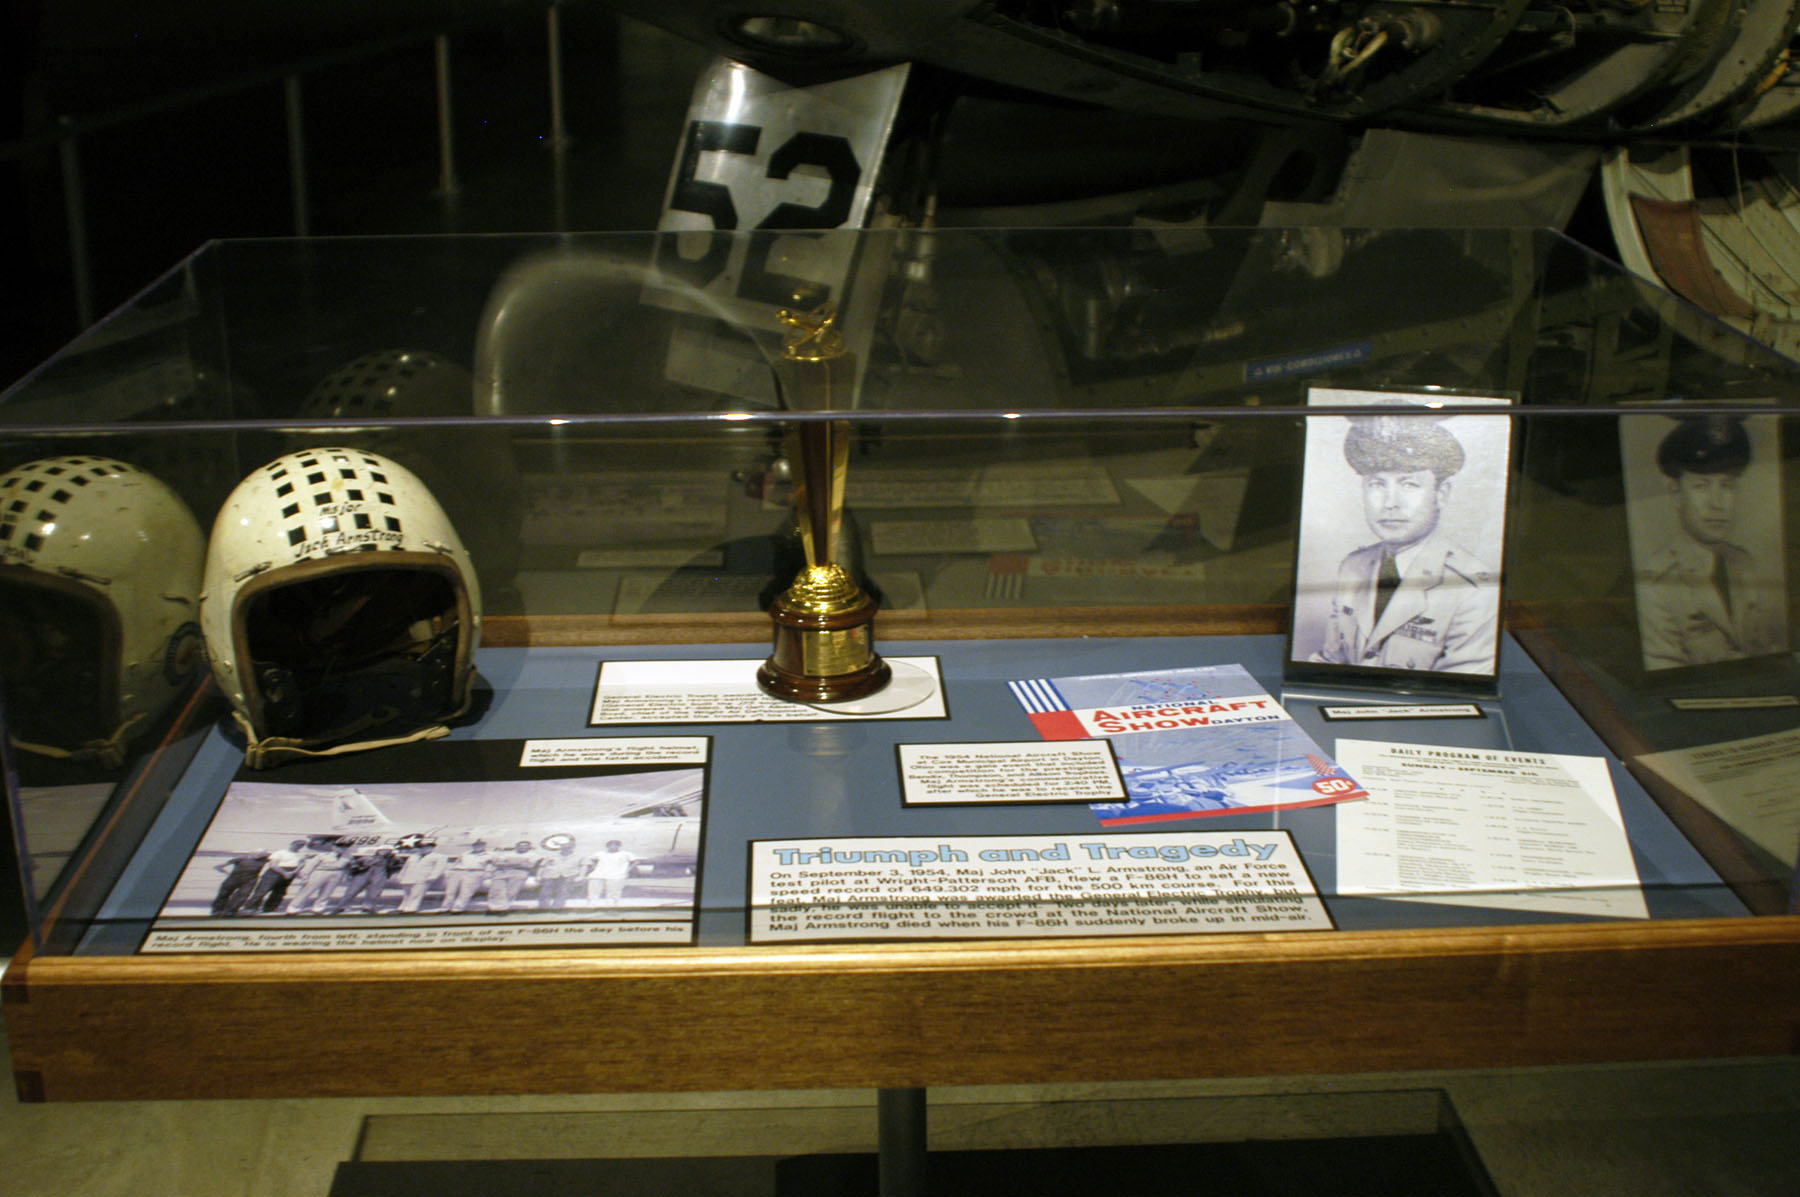 This exhibit at the National Museum of the United States Air Force, Wright-Patterson AFB, ohio, commemorates Major Armstrong's record-setting flight. His flight helmet is included in the display. (U.S. Air Force)